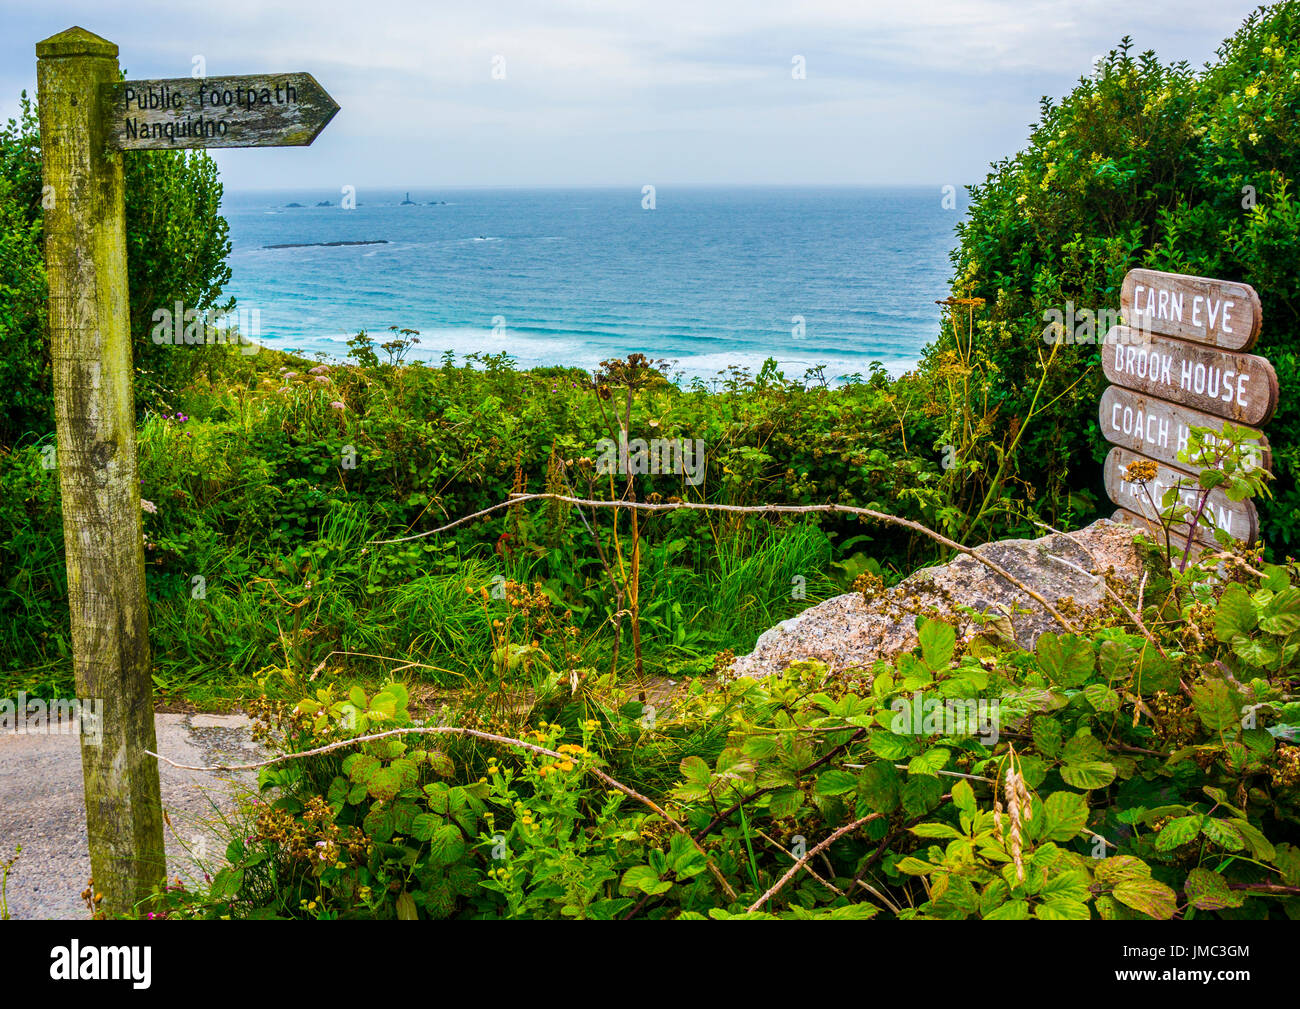 Public footpath to Nanquidno sign overlooking the sea, Cornwall, England, UK Stock Photo